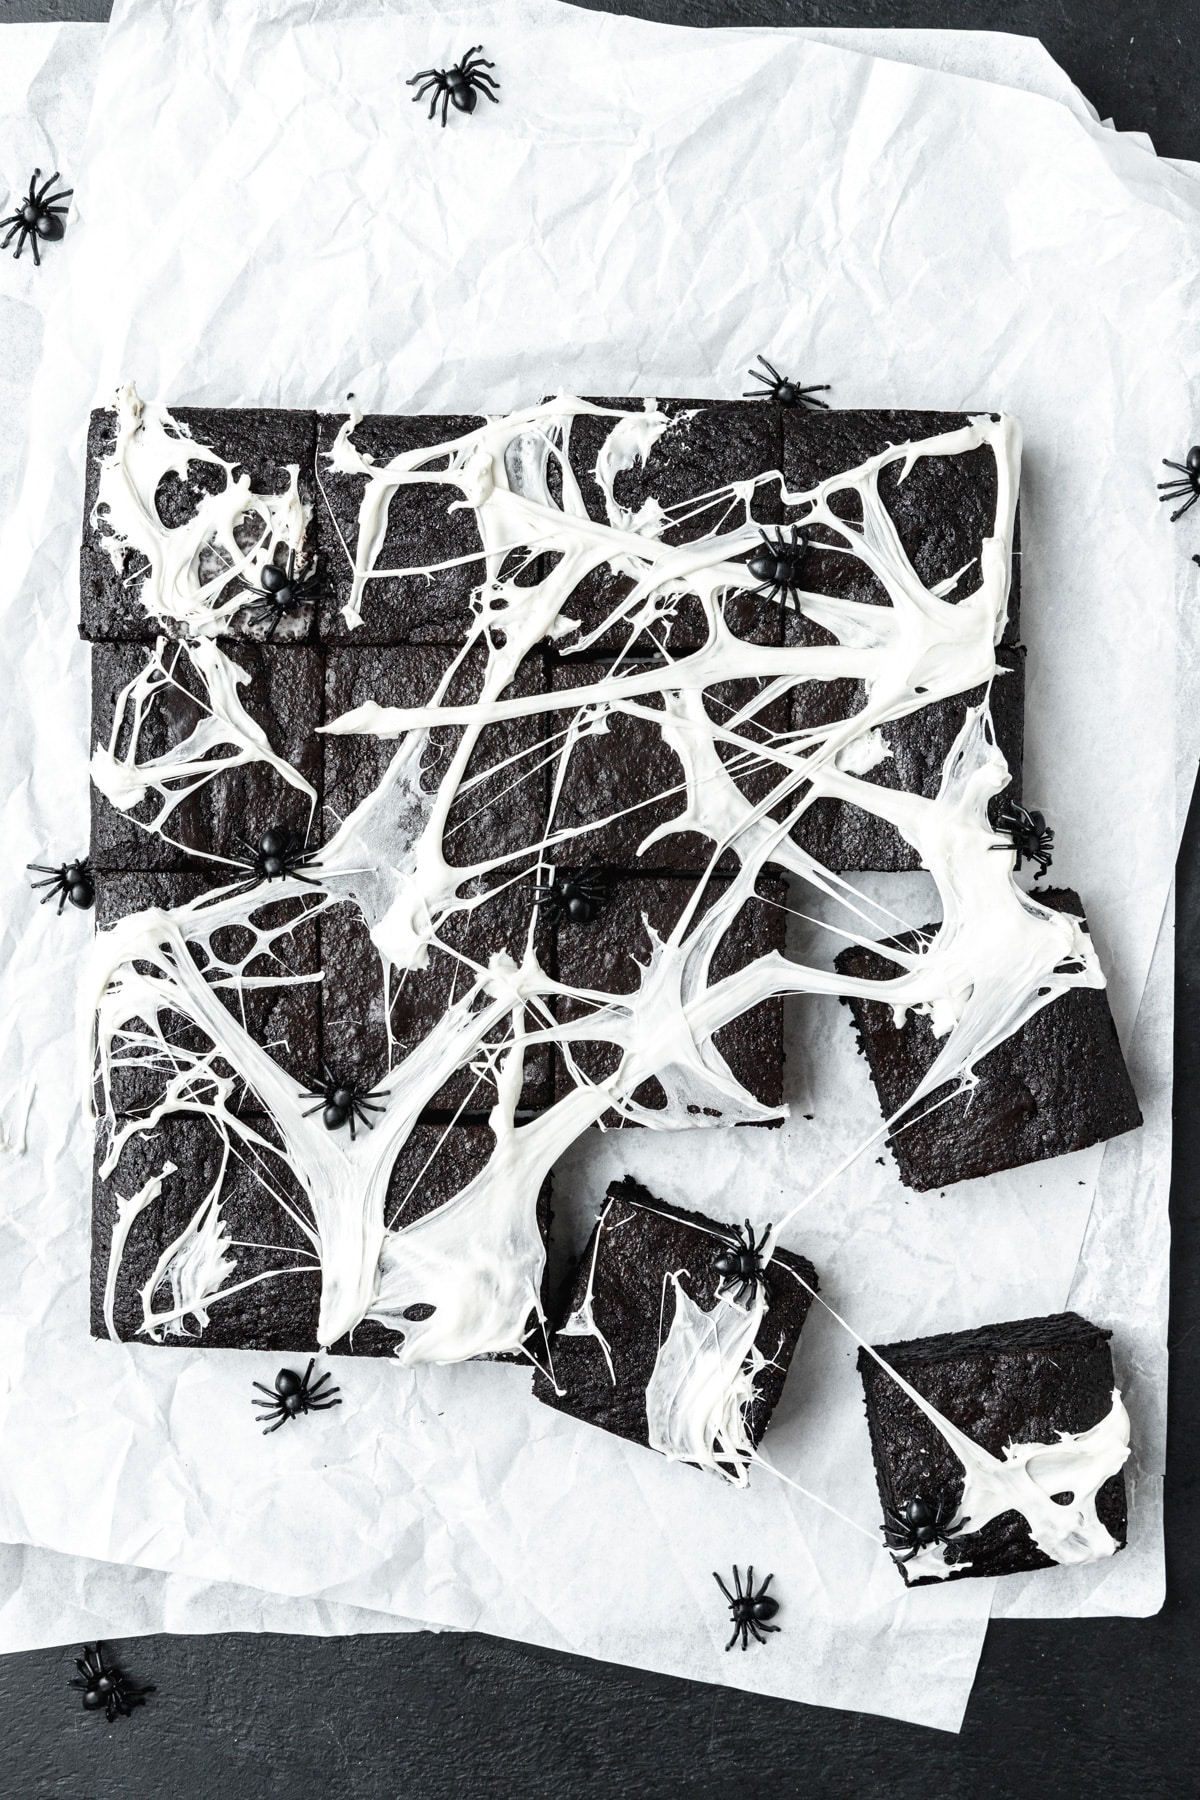 black cocoa brownies with marshmallow spider webs on top.